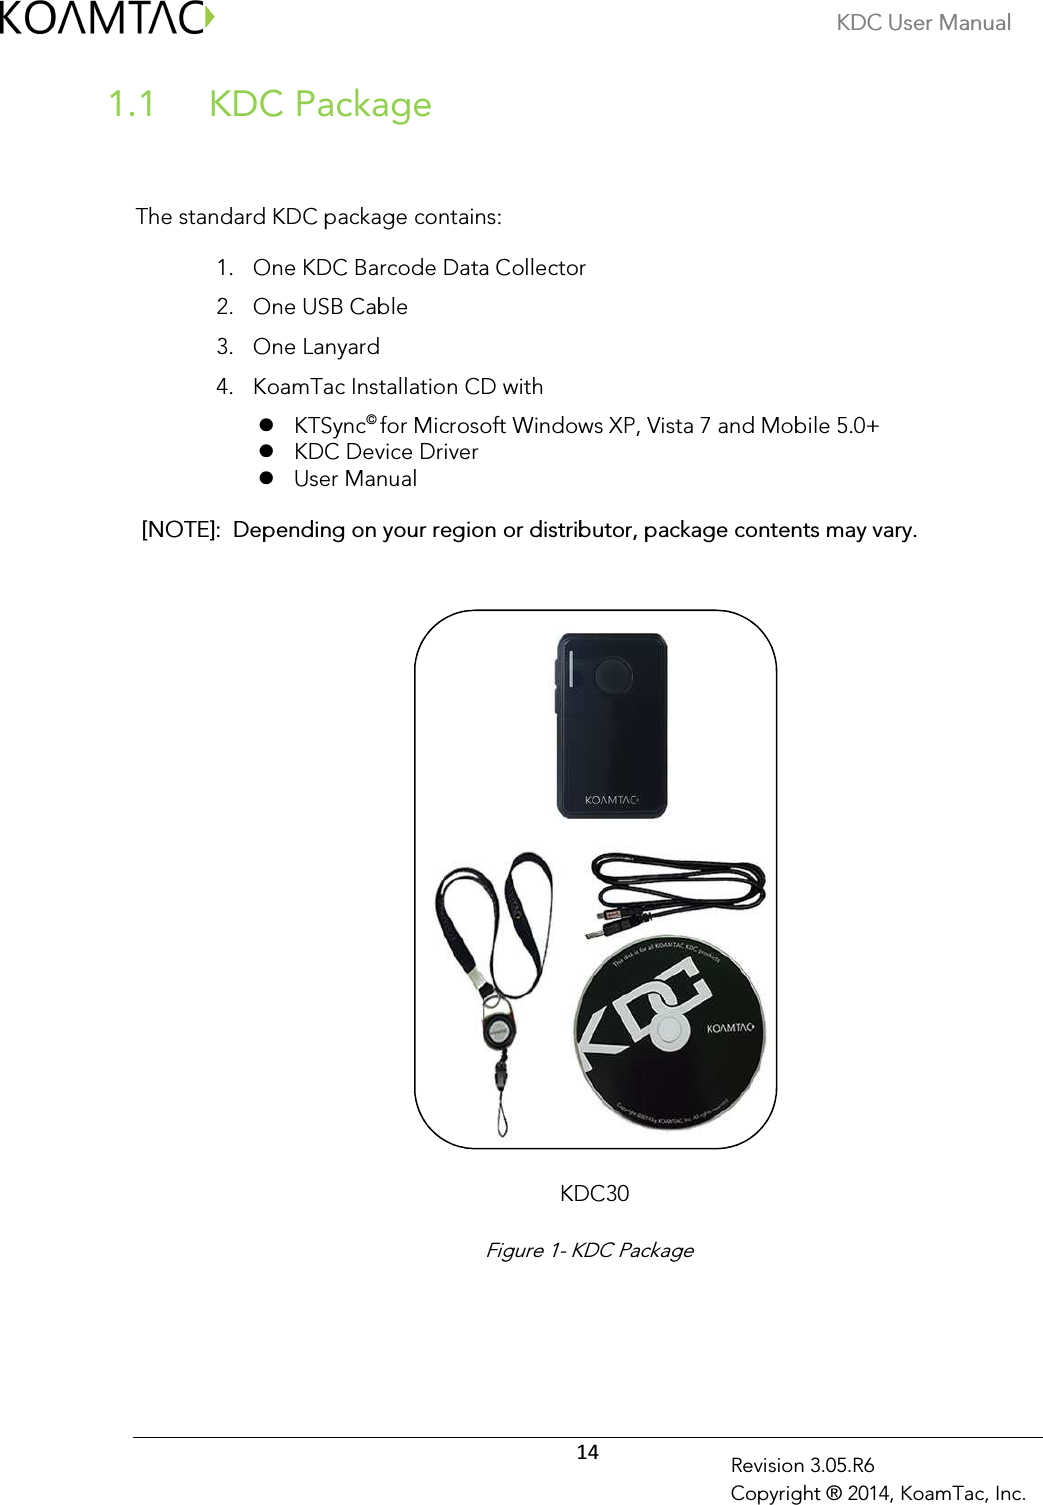 KDC User Manual  14 Revision 3.05.R6 Copyright ® 2014, KoamTac, Inc.  KDC Package 1.1  The standard KDC package contains: 1. One KDC Barcode Data Collector 2. One USB Cable 3. One Lanyard  4. KoamTac Installation CD with  KTSync© for Microsoft Windows XP, Vista 7 and Mobile 5.0+  KDC Device Driver    User Manual  [NOTE]:  Depending on your region or distributor, package contents may vary.              Figure 1- KDC Package KDC30 